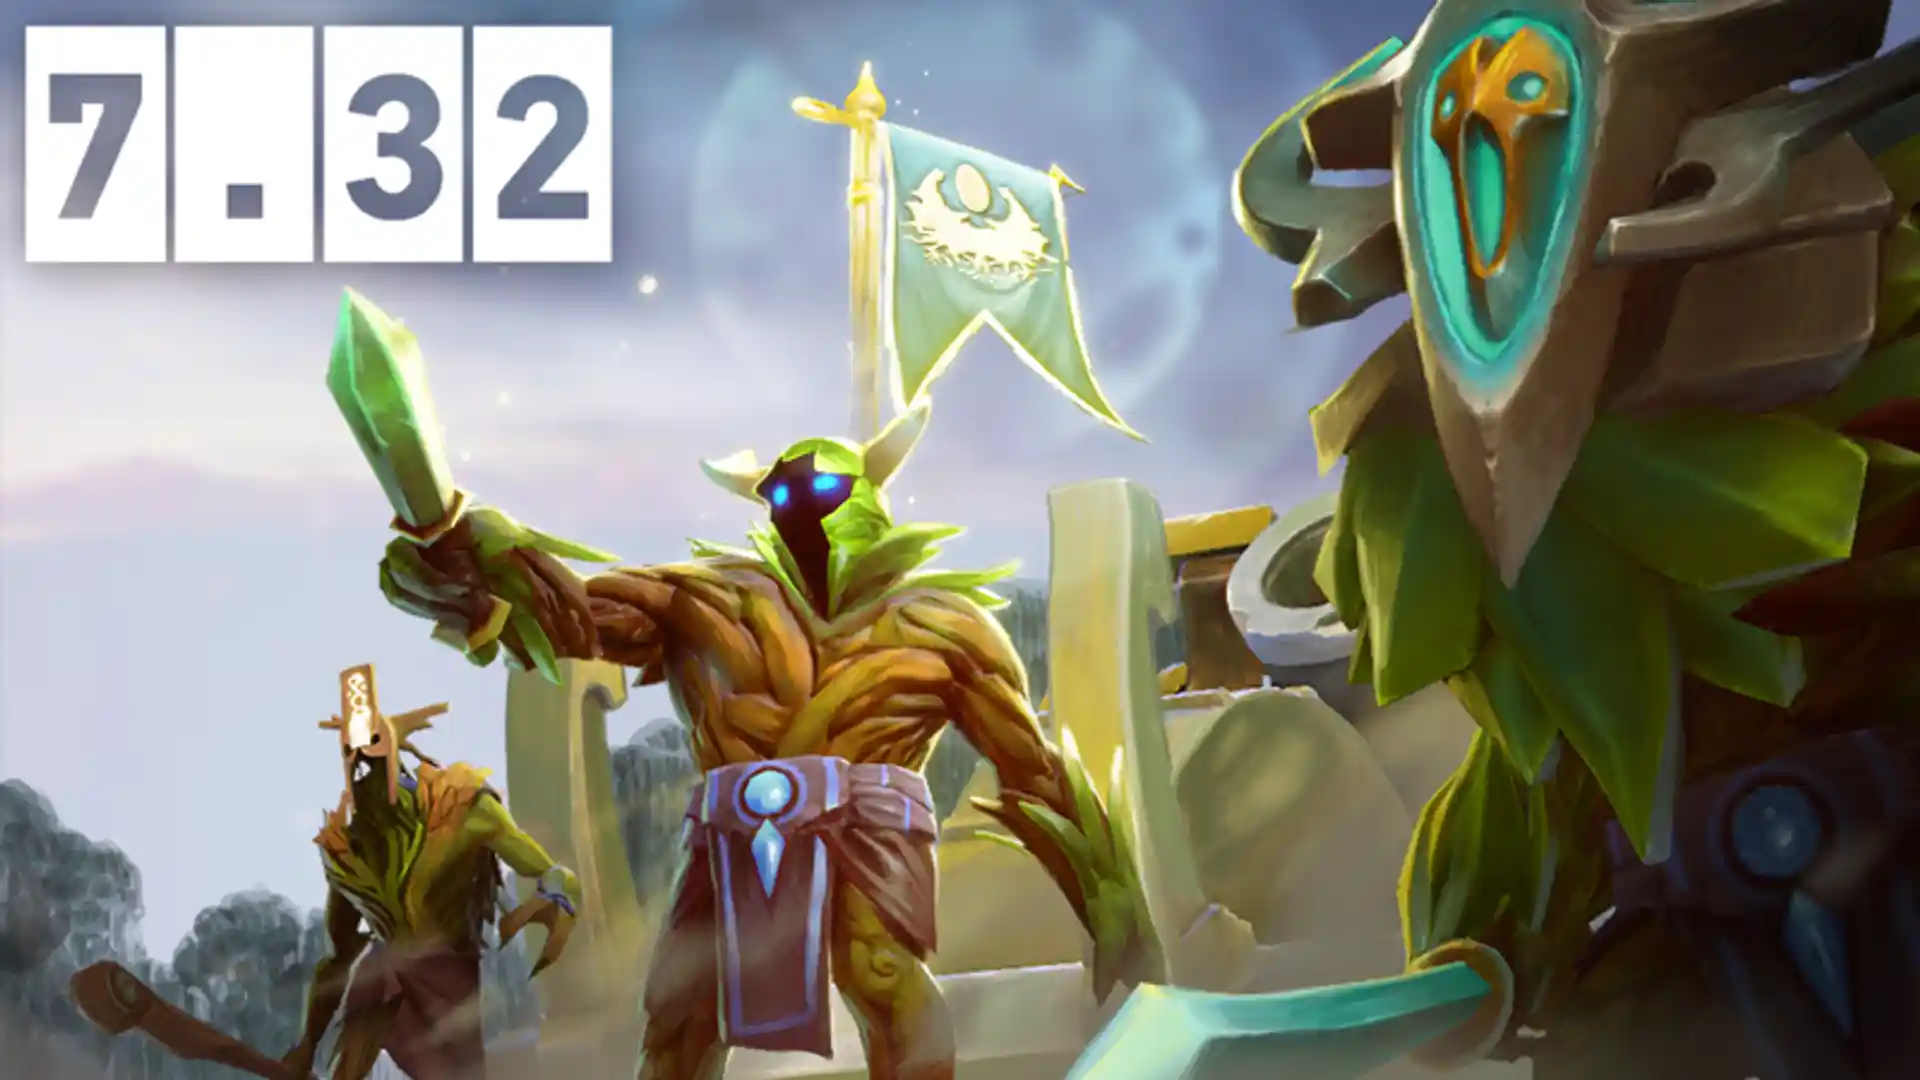 Dota 2 Patch 7.32c - Who got the best out of it, and who lost the mojo?